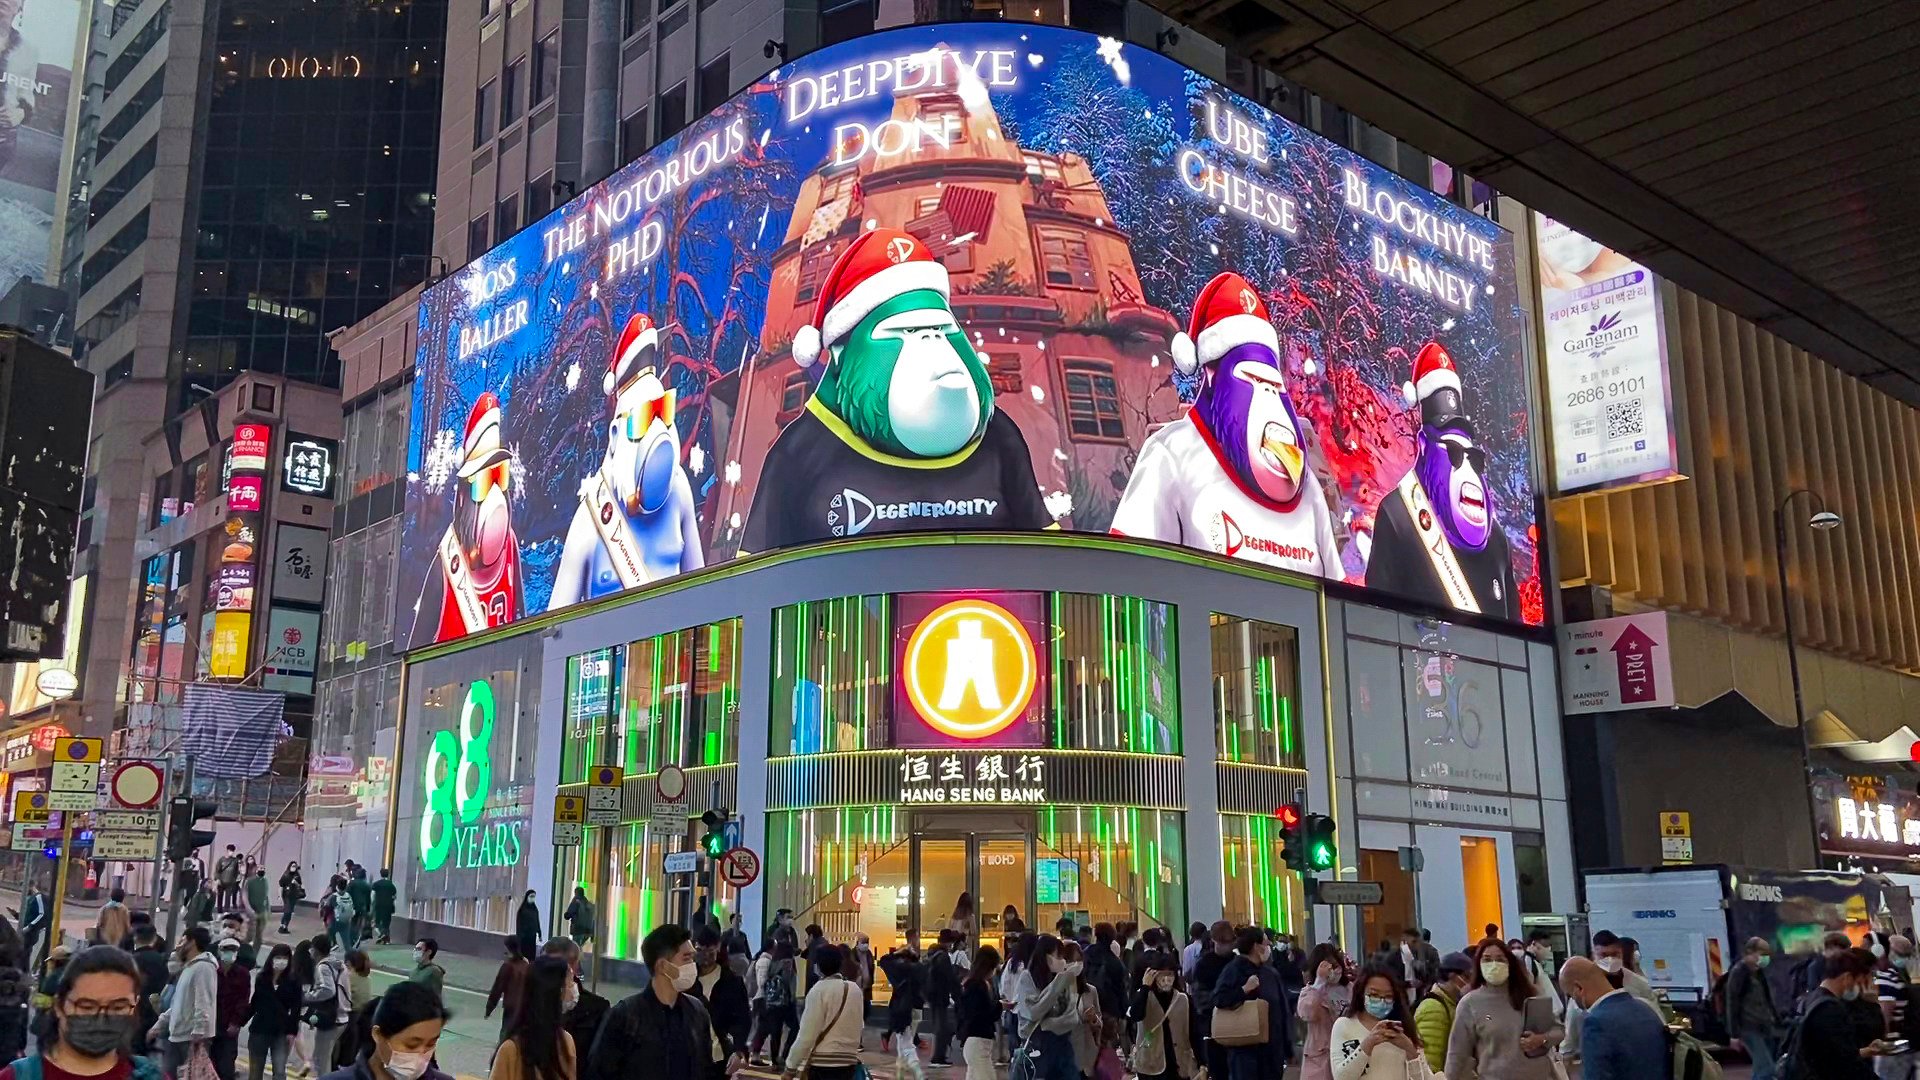 Hong Kong collectors of Degenerate Ape Academy, a popular NFT project on the Solana blockchain, have rented out an ad space in Central to promote NFTs. Photo: Handout